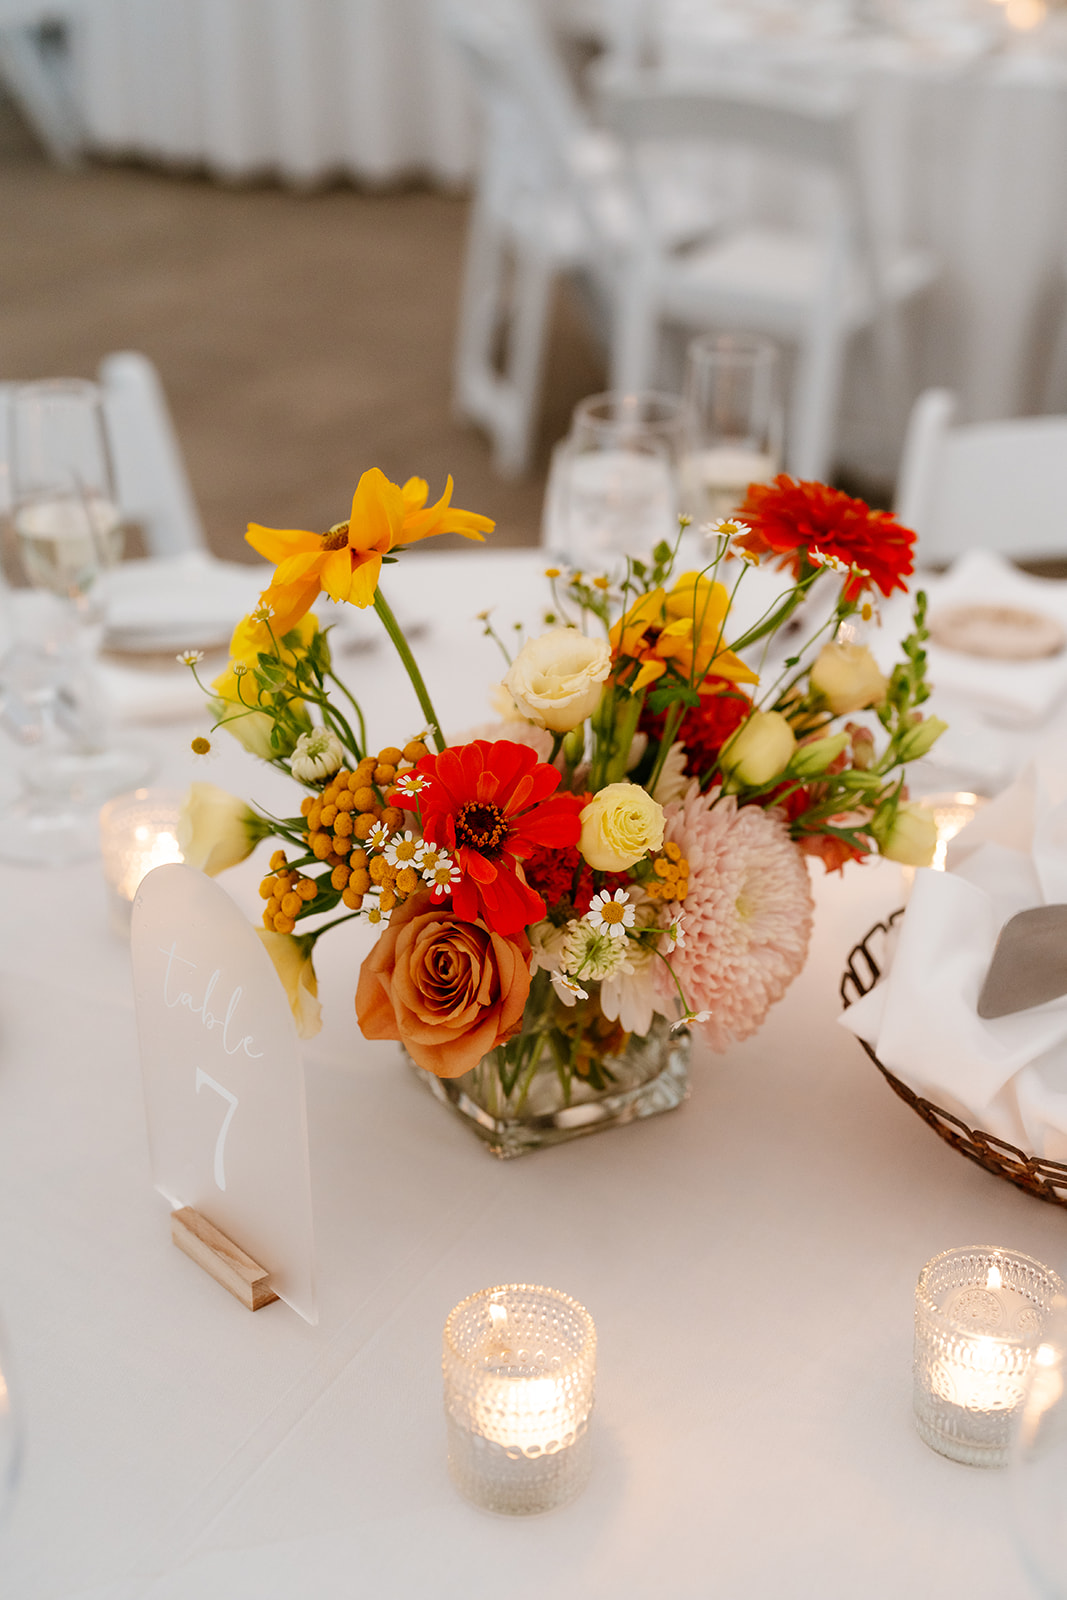 Elegant table setting featuring a vibrant floral centerpiece and candlelight with a table number sign.